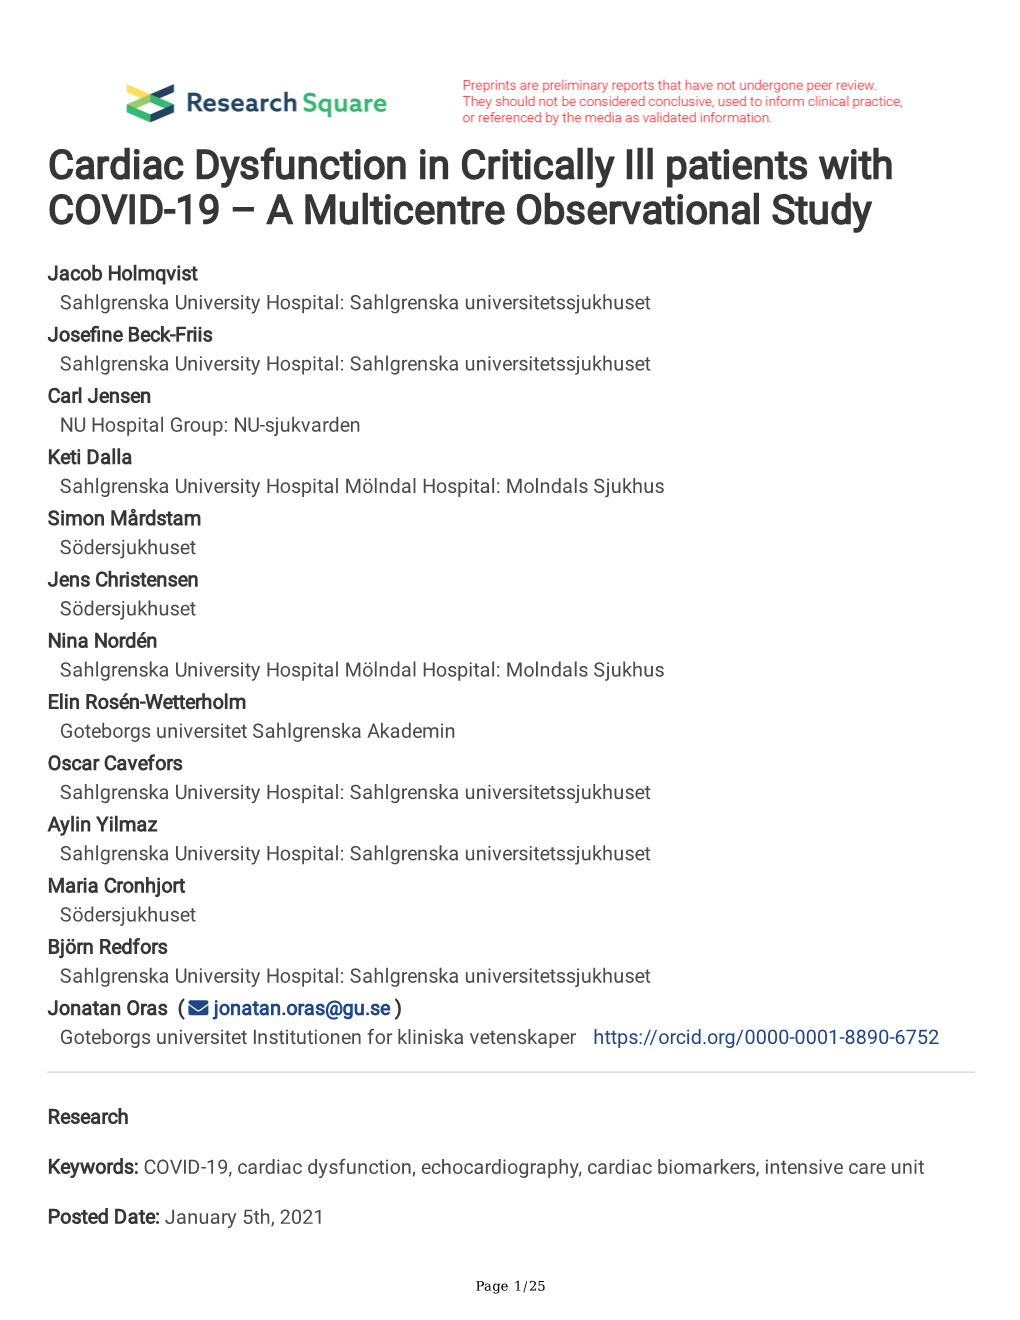 Cardiac Dysfunction in Critically Ill Patients with COVID-19 – a Multicentre Observational Study